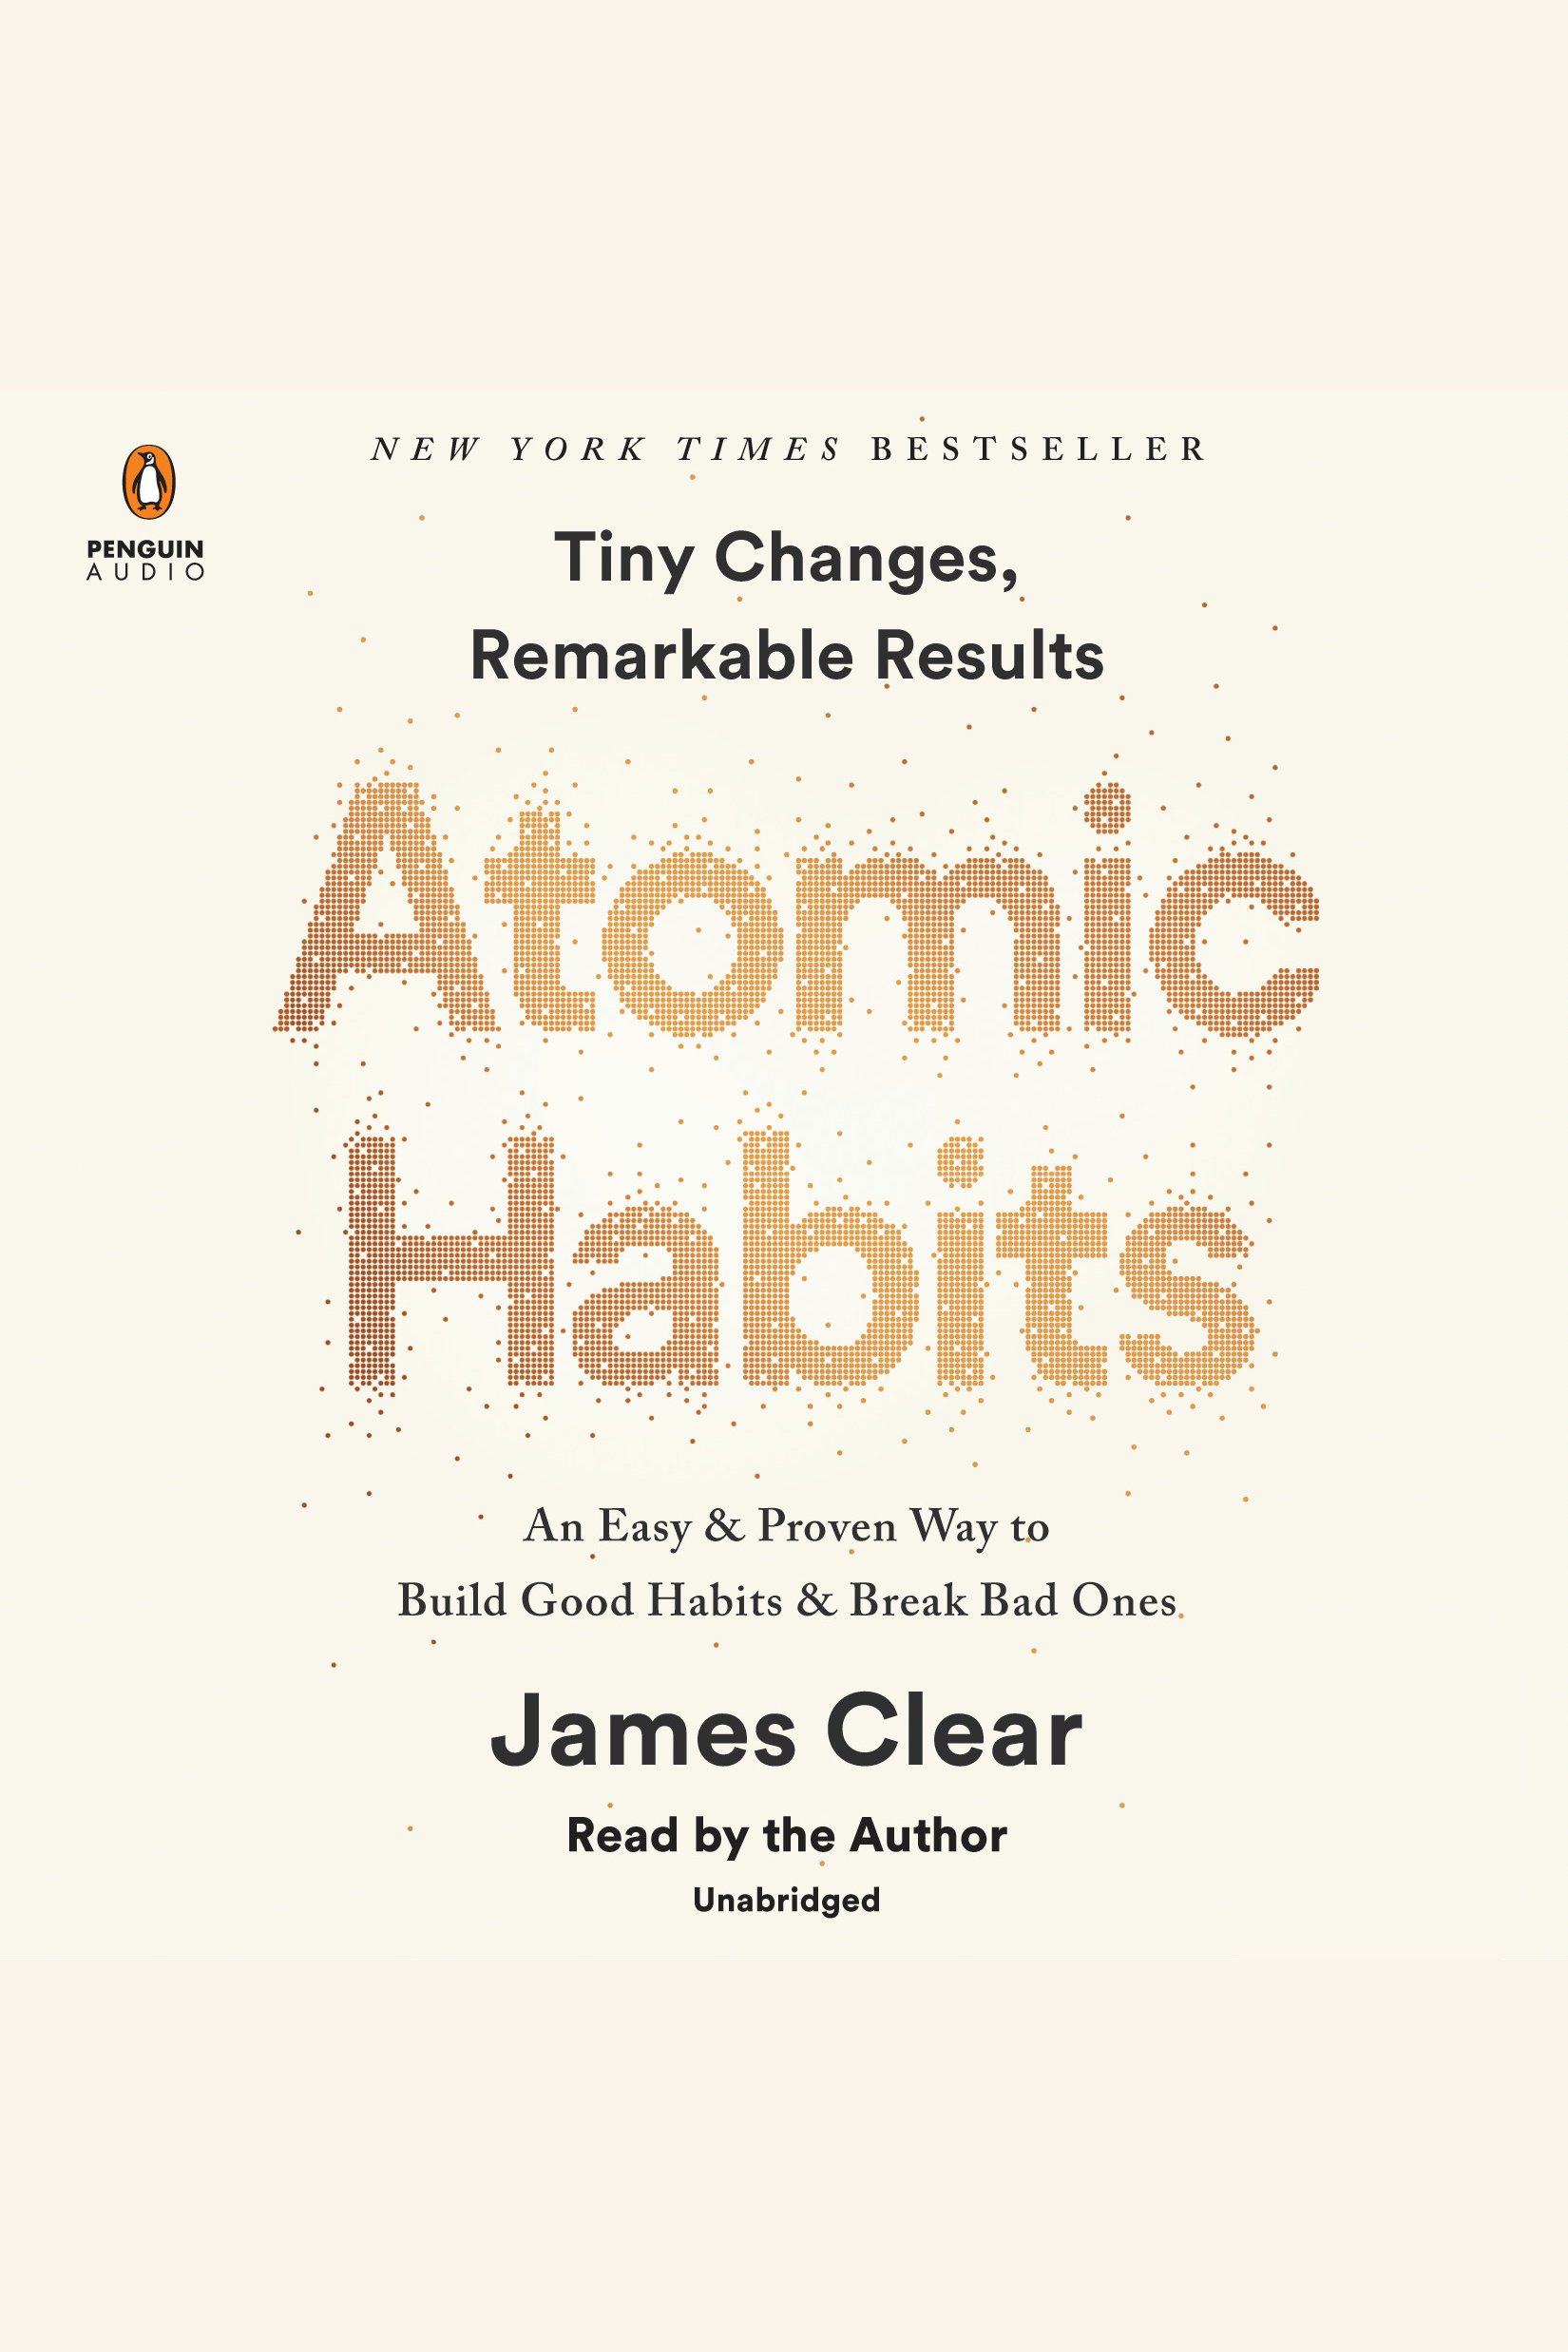 Atomic habits : tiny changes, remarkable results : an easy & proven way to build good habits & break bad ones